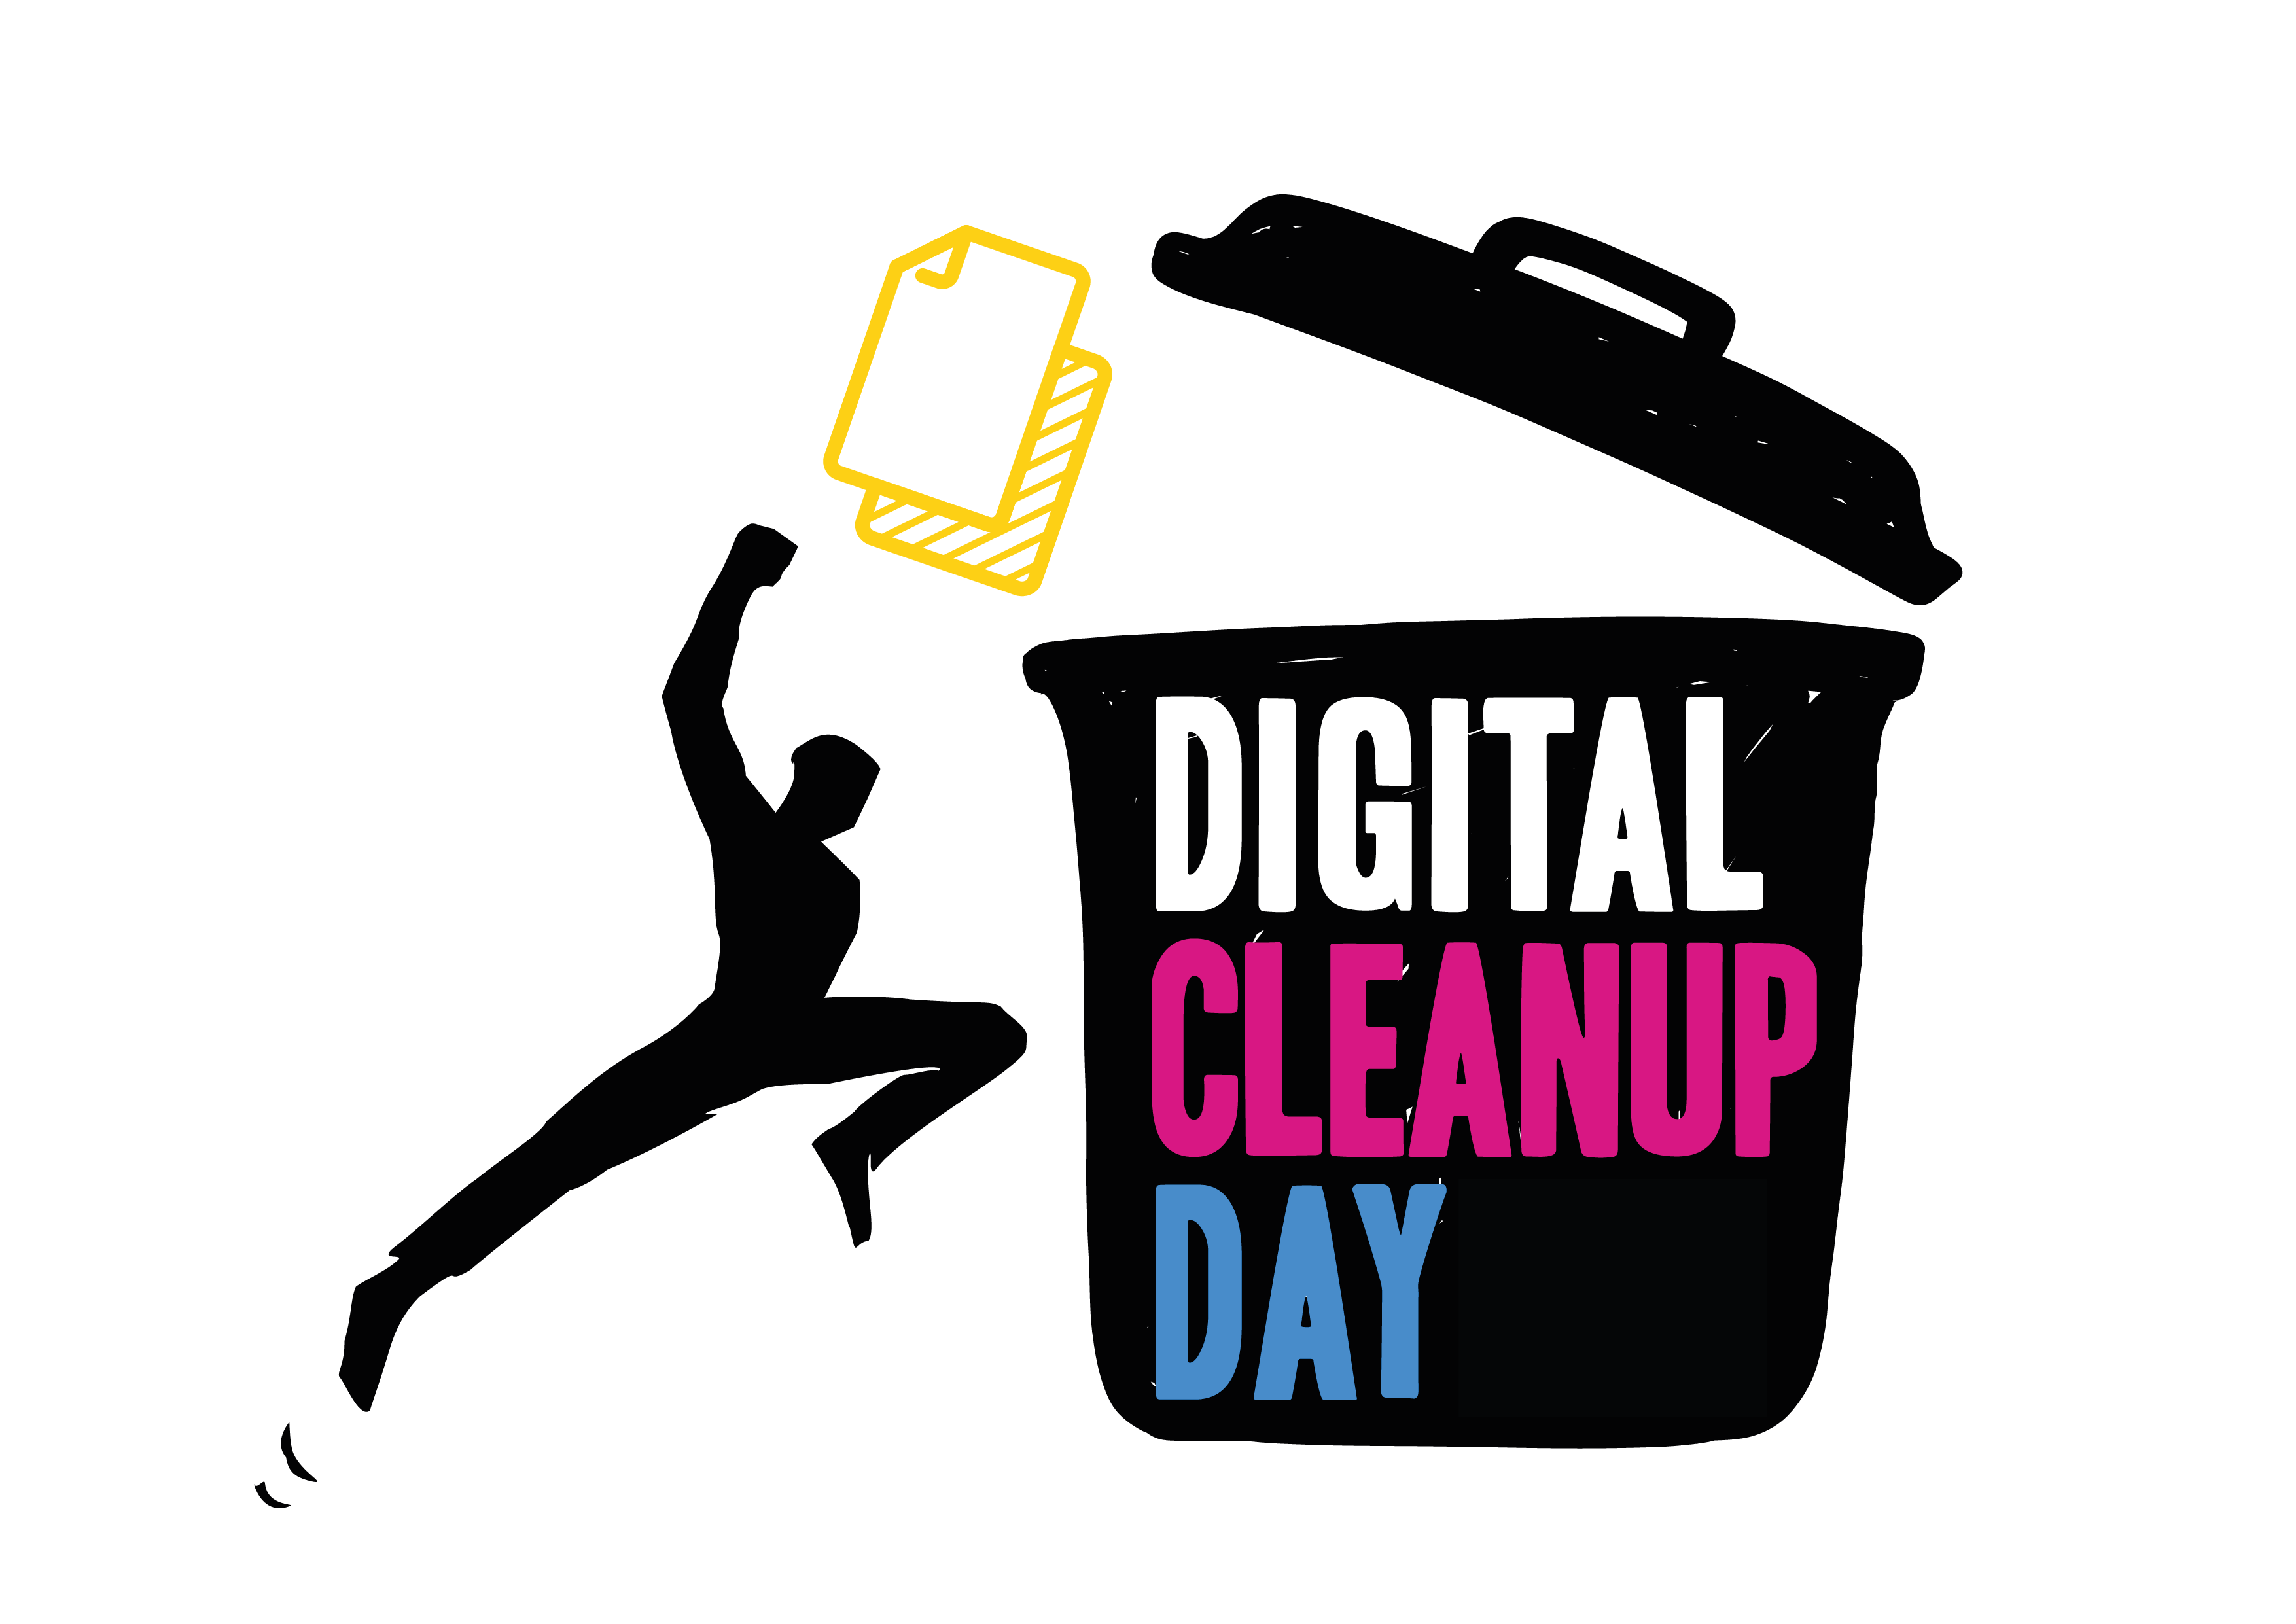 Digital Cleanup Day